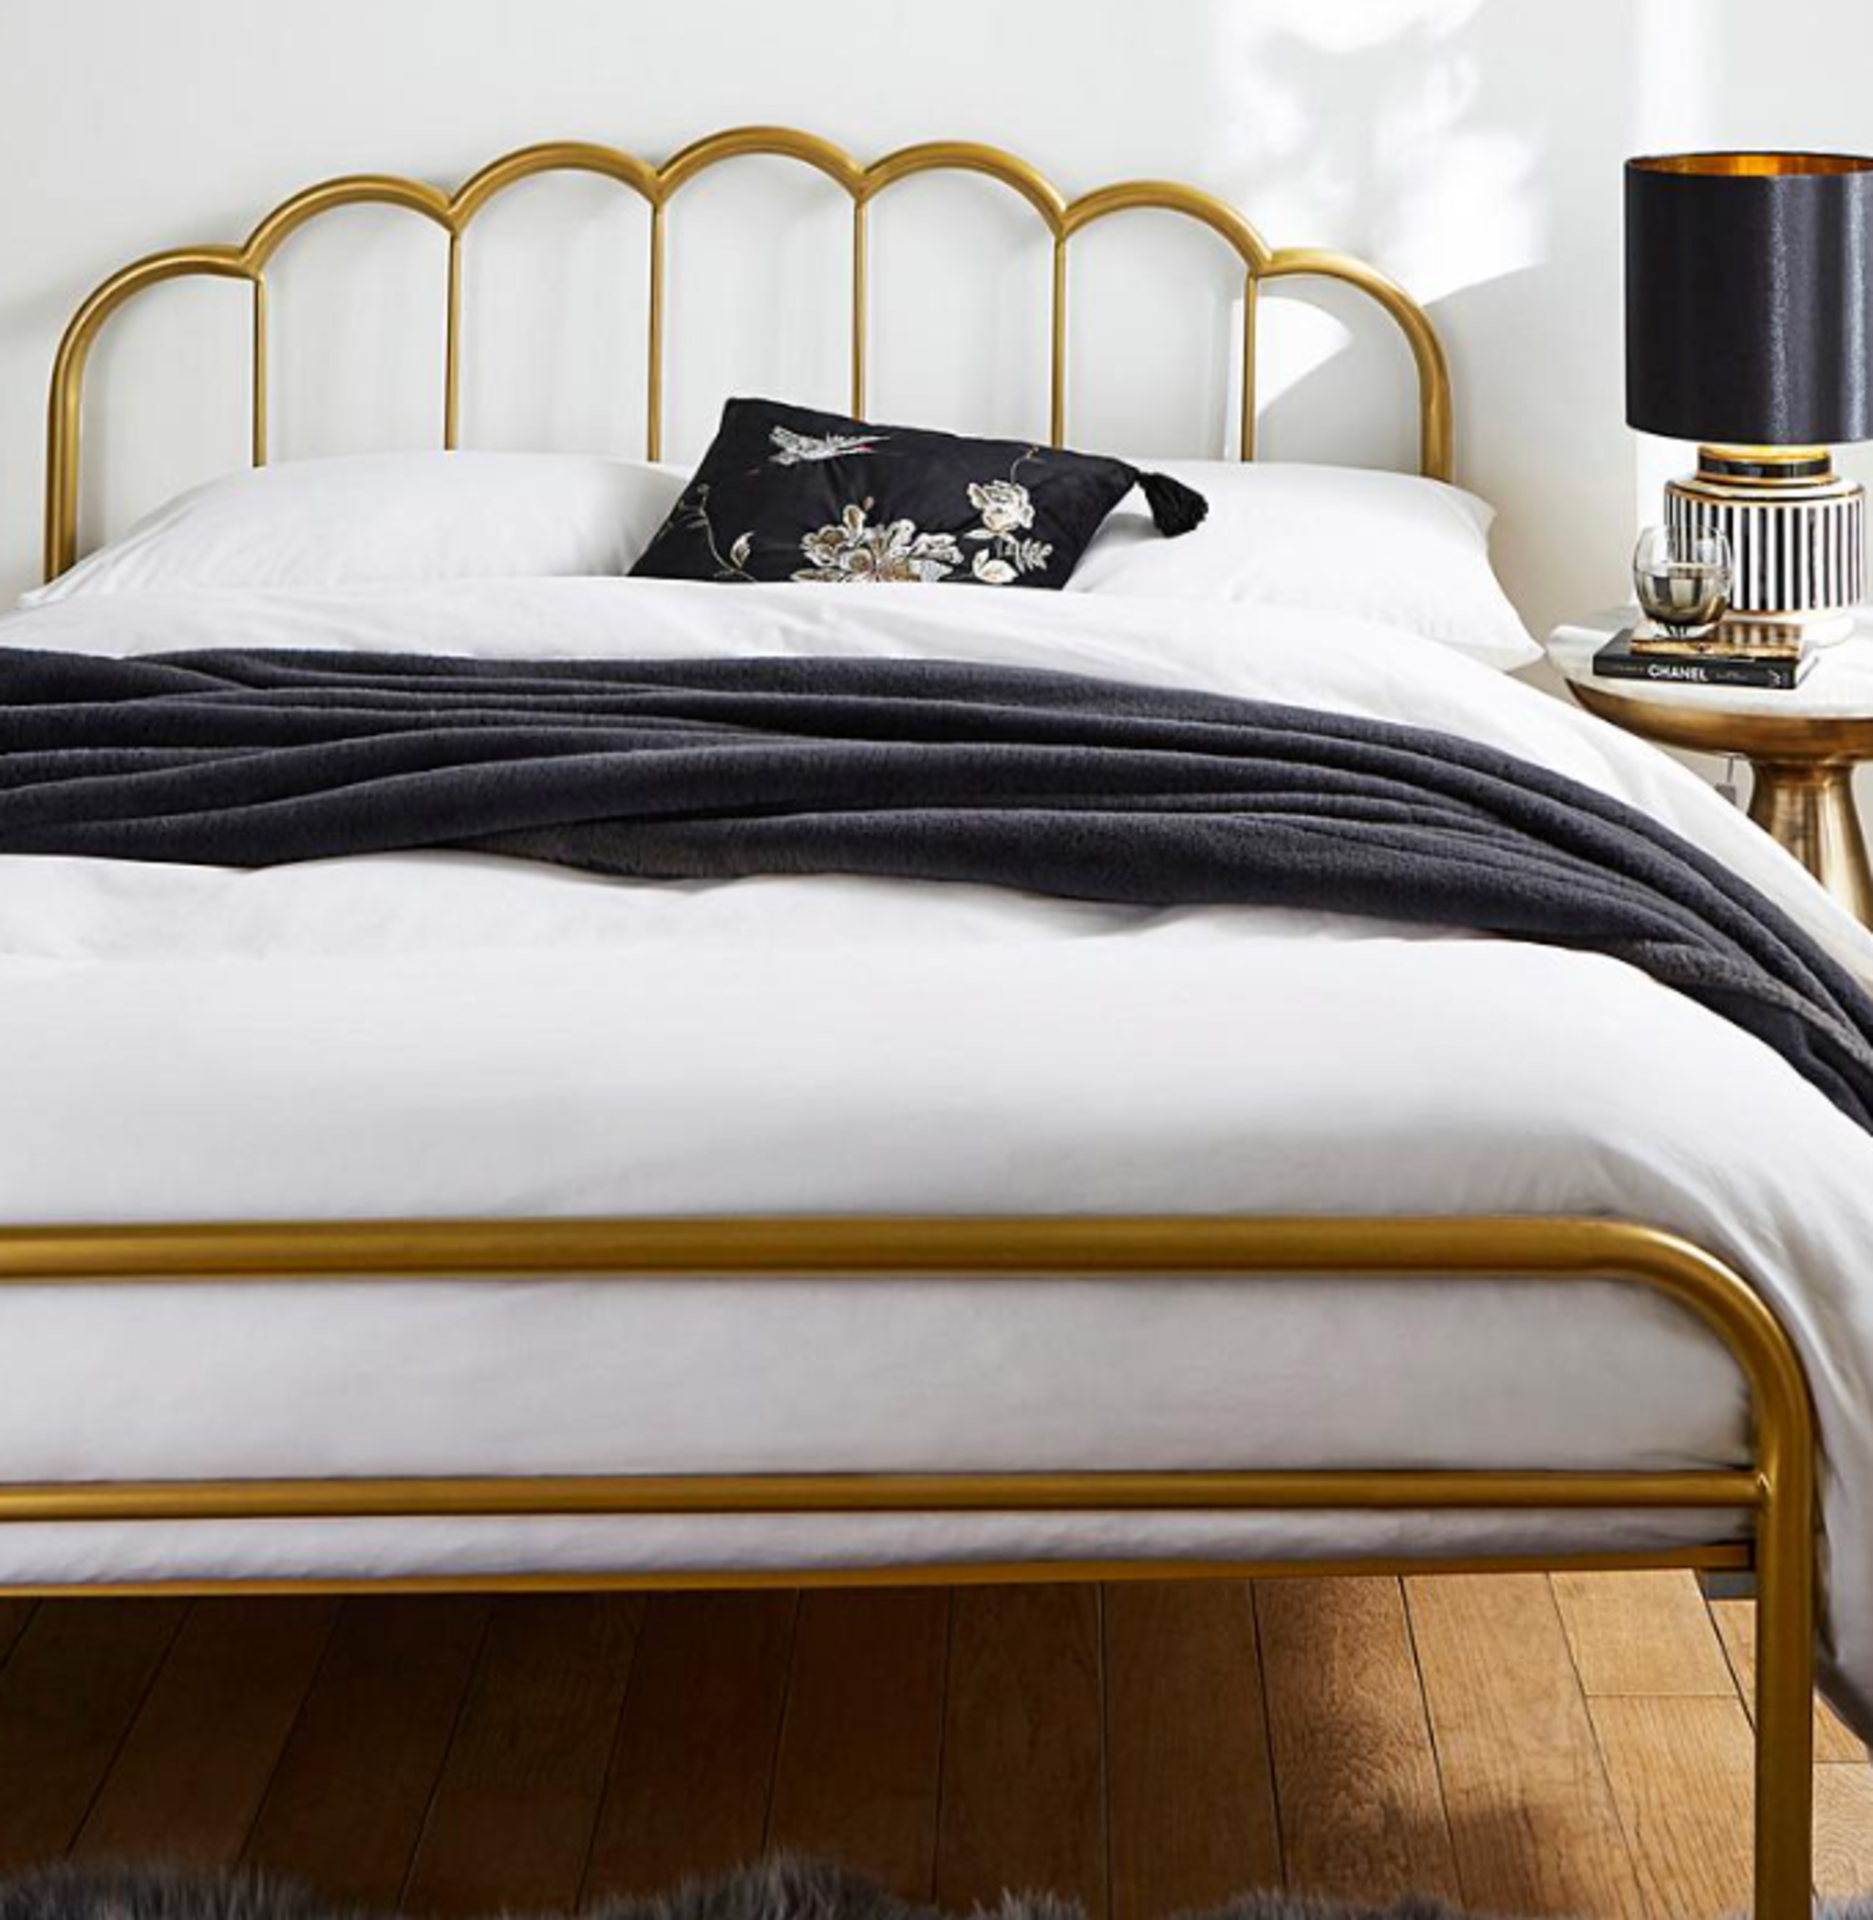 King Size Joanna Hope Vivienne Scalloped Metal Bed. - ER20. RRP £329.00. Part of the Joanna Hope